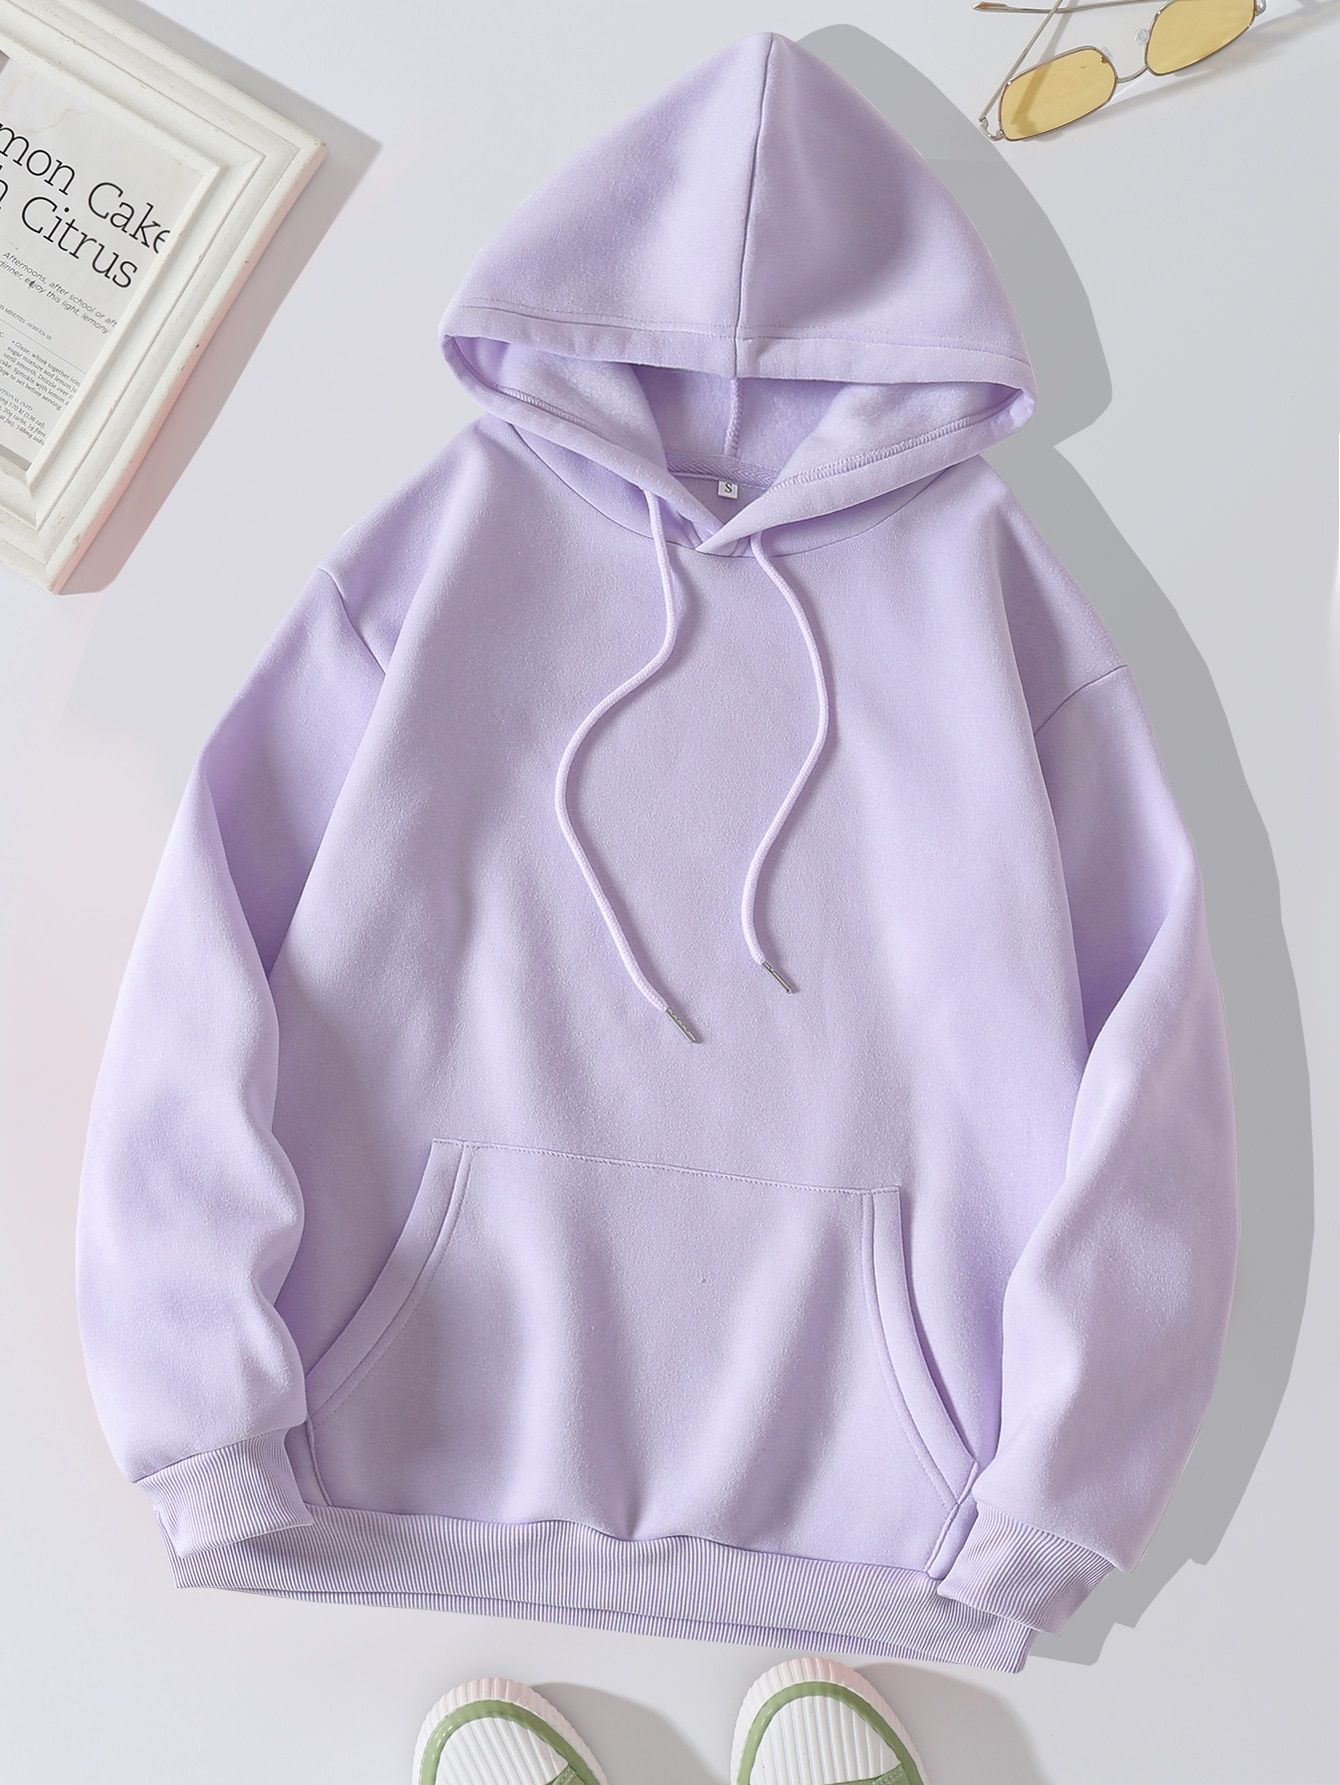 Hoodies For Women: Comfortable and Versatile Casual Wear